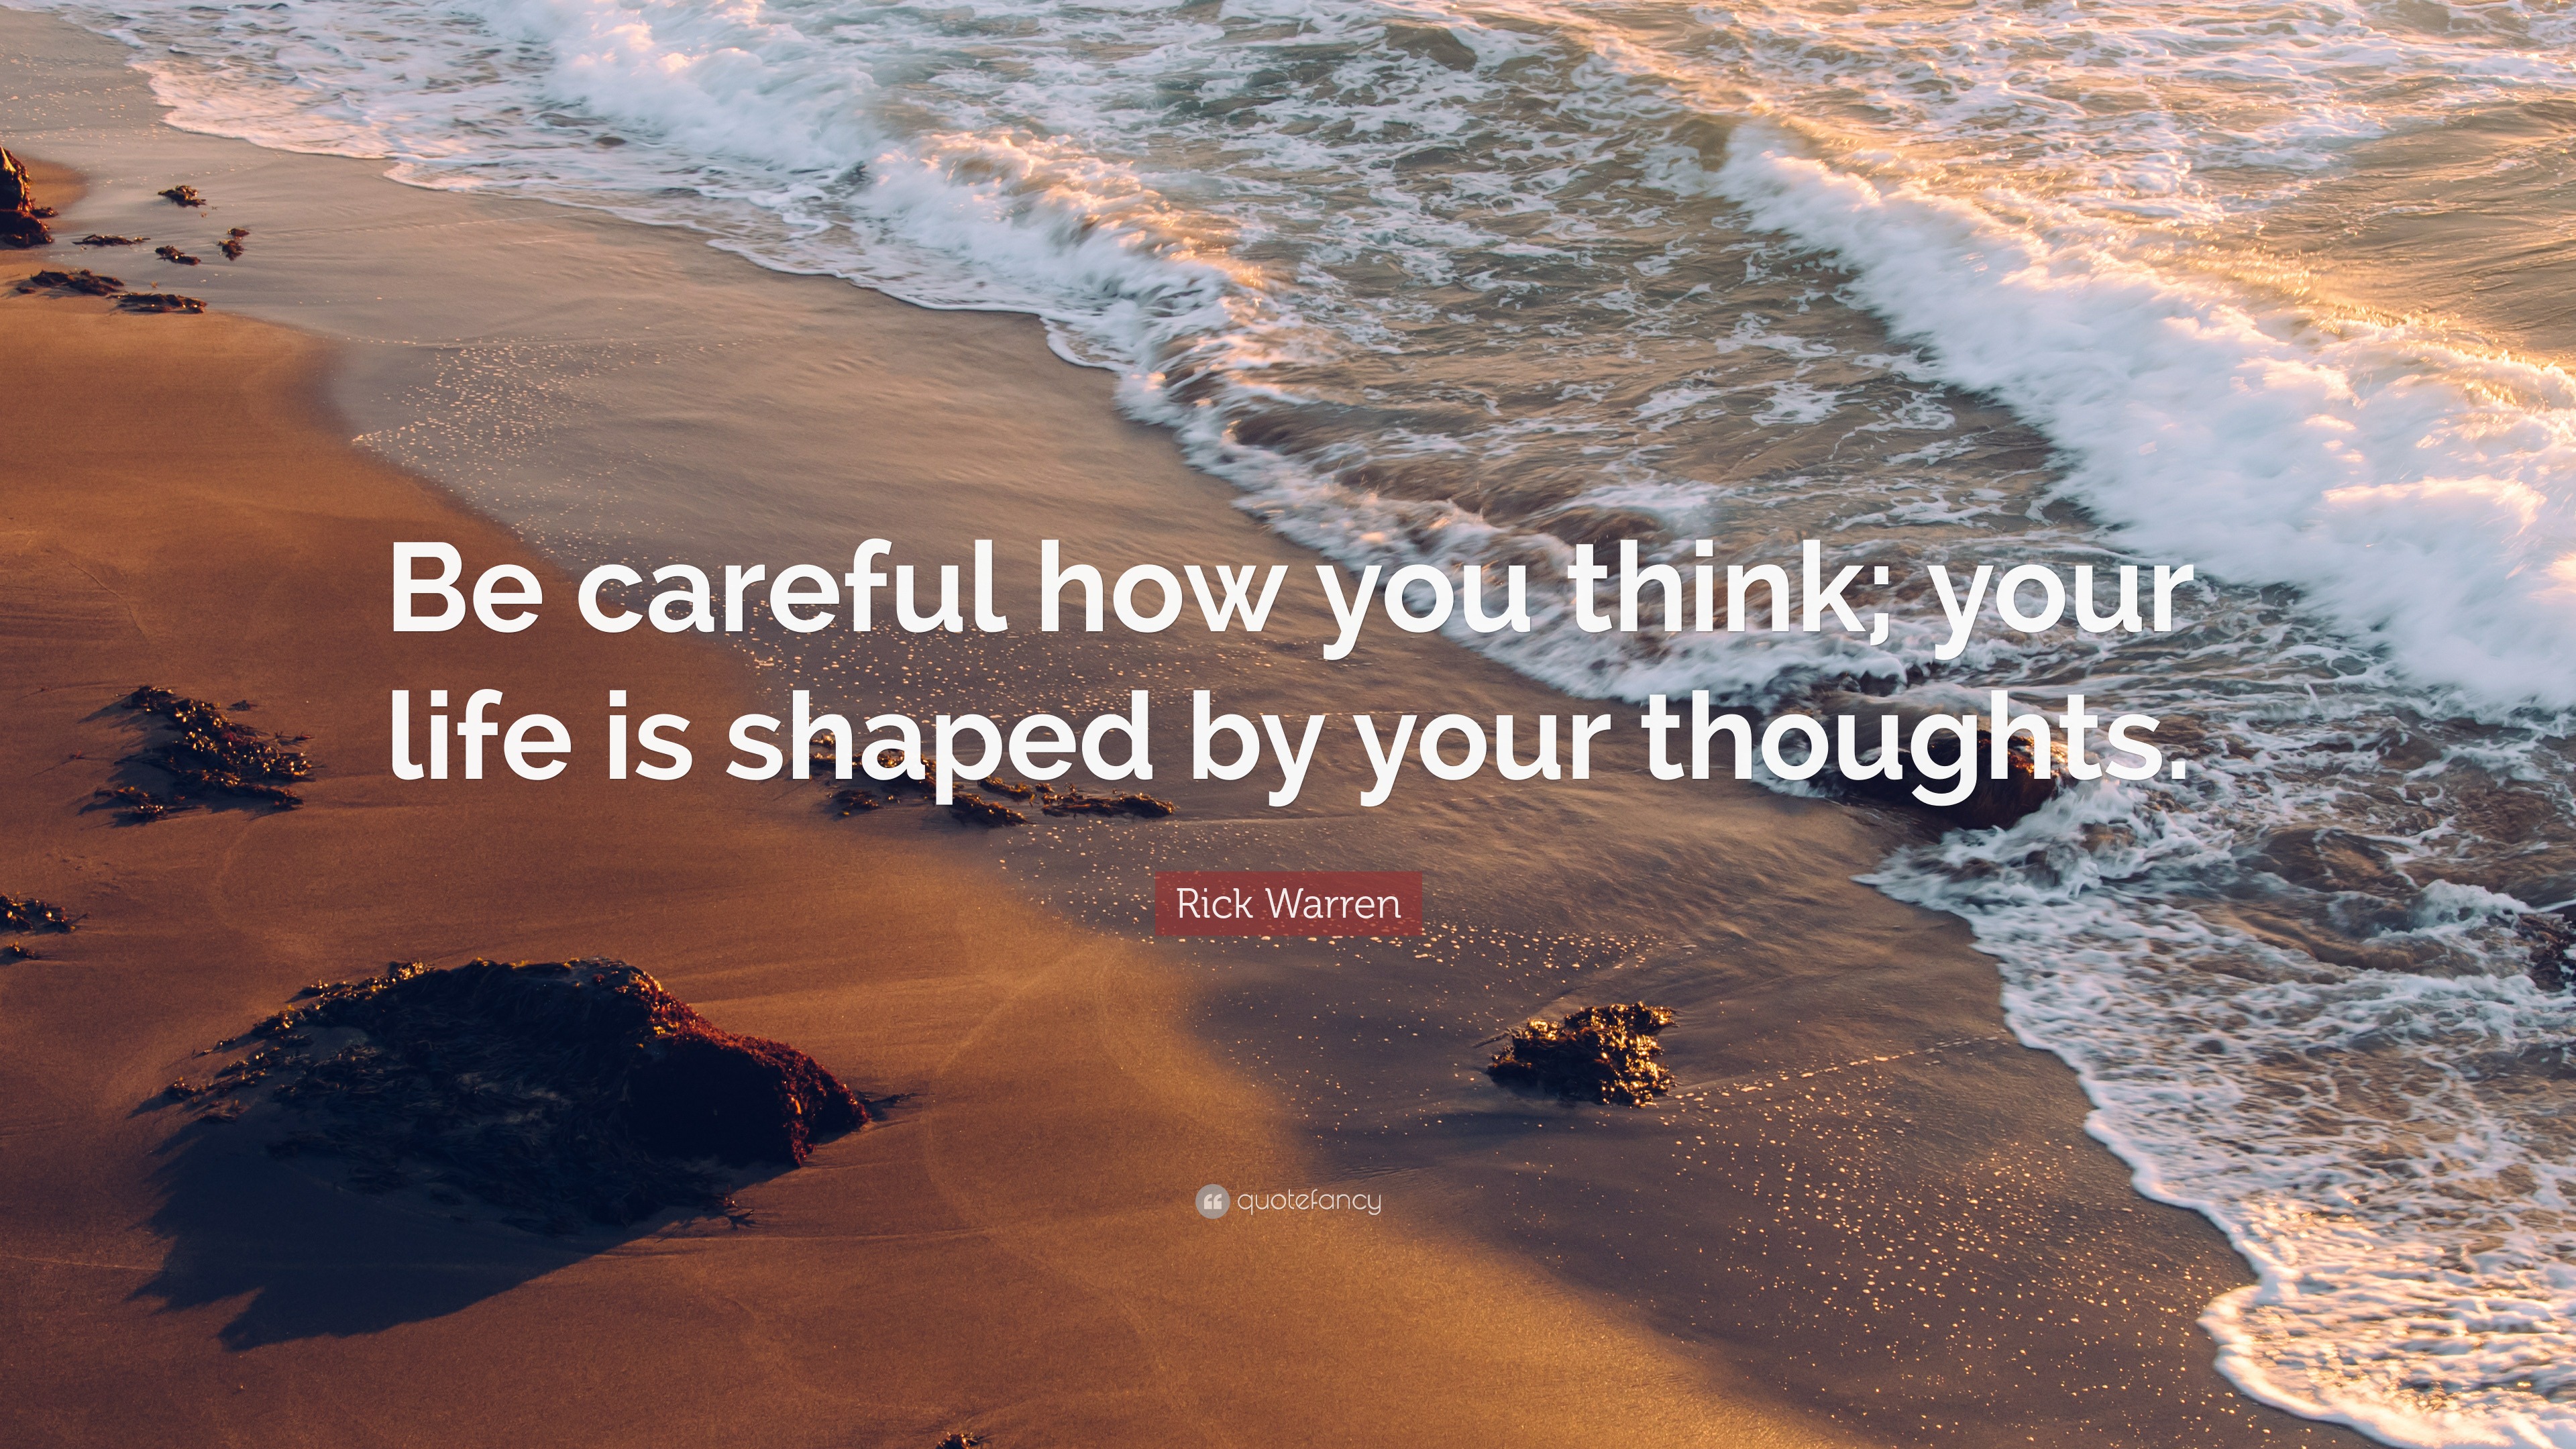 Rick Warren Quote “be Careful How You Think Your Life Is Shaped By Your Thoughts” 8253